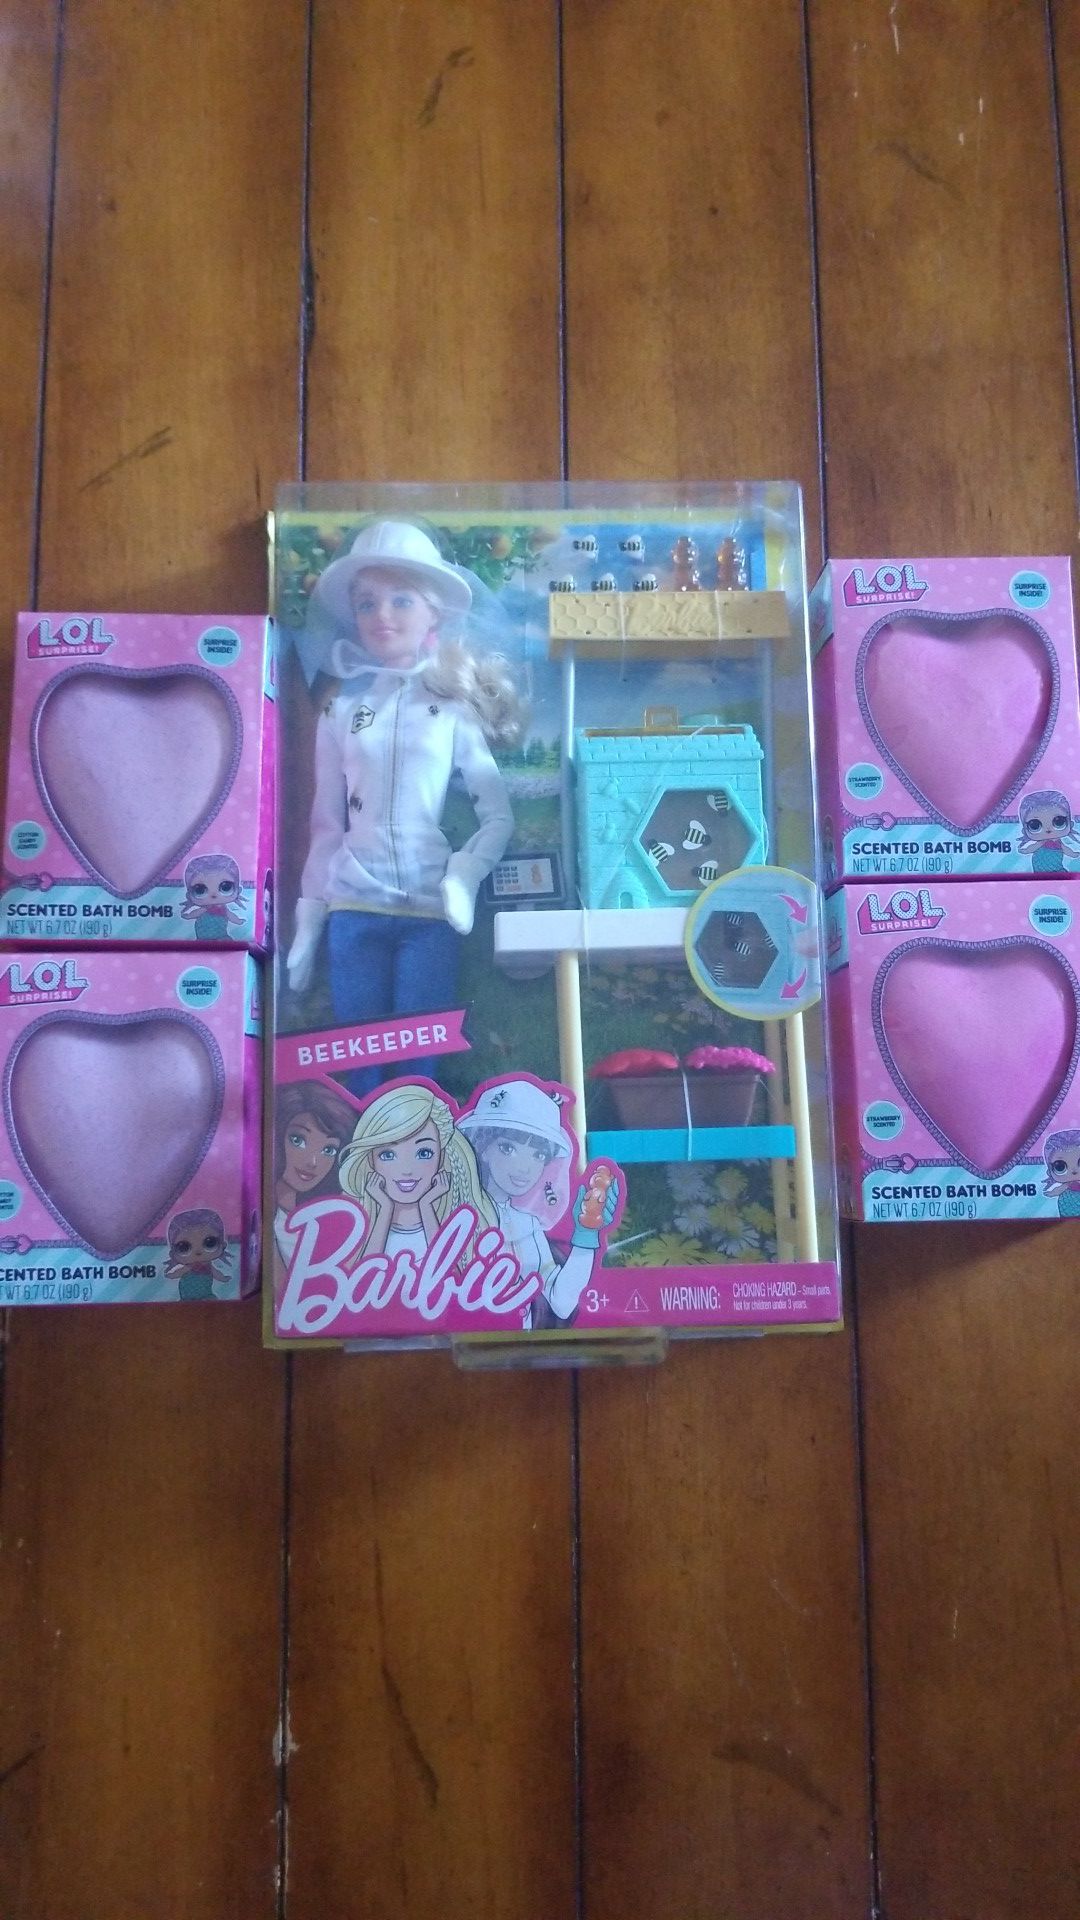 New girls toy lot Barbie beekeeper doll and LOL bath bombs with surprises inside 🐇🎁 birthday Easter basket